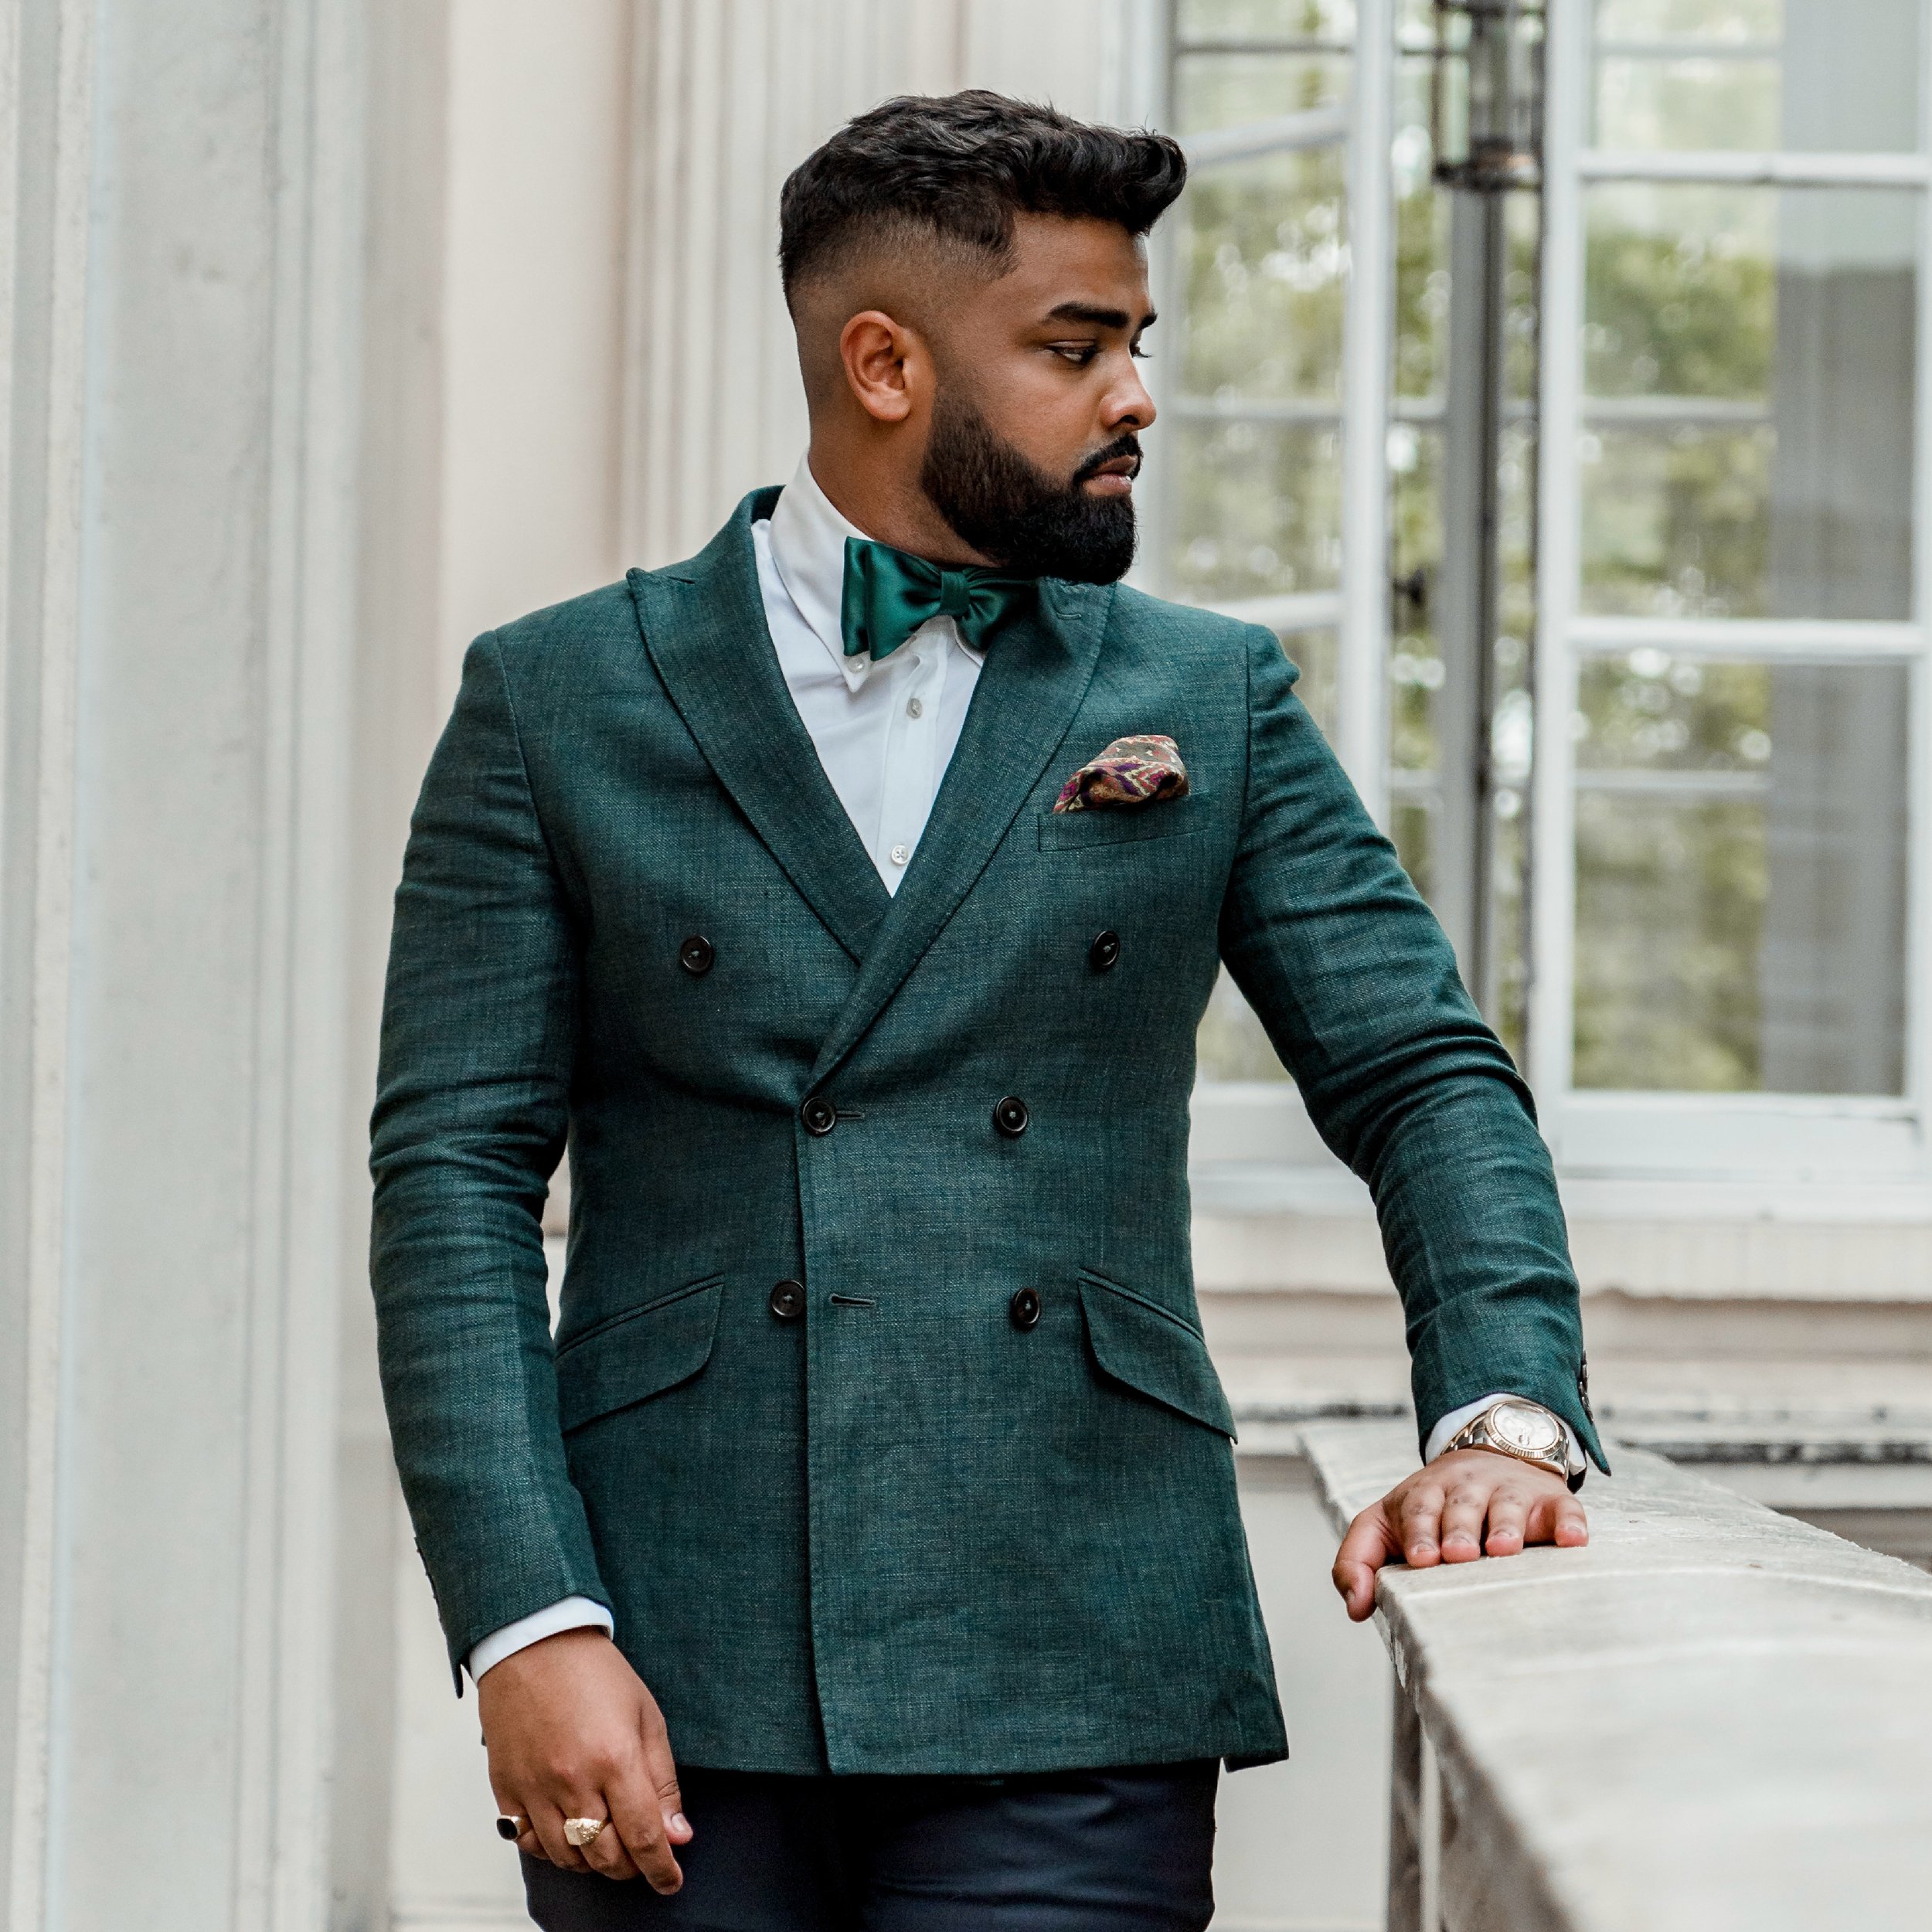 Tailoring that stands out - Forest Green Double breasted blazer in 100% Wool 

#menswear #sarankohlilabel #contemporary #tailoring #mensweartailoring #mensfashion  #newdelhi #styleindia #menswearindia #instastyle #london #menofstyle #southasianvibe #